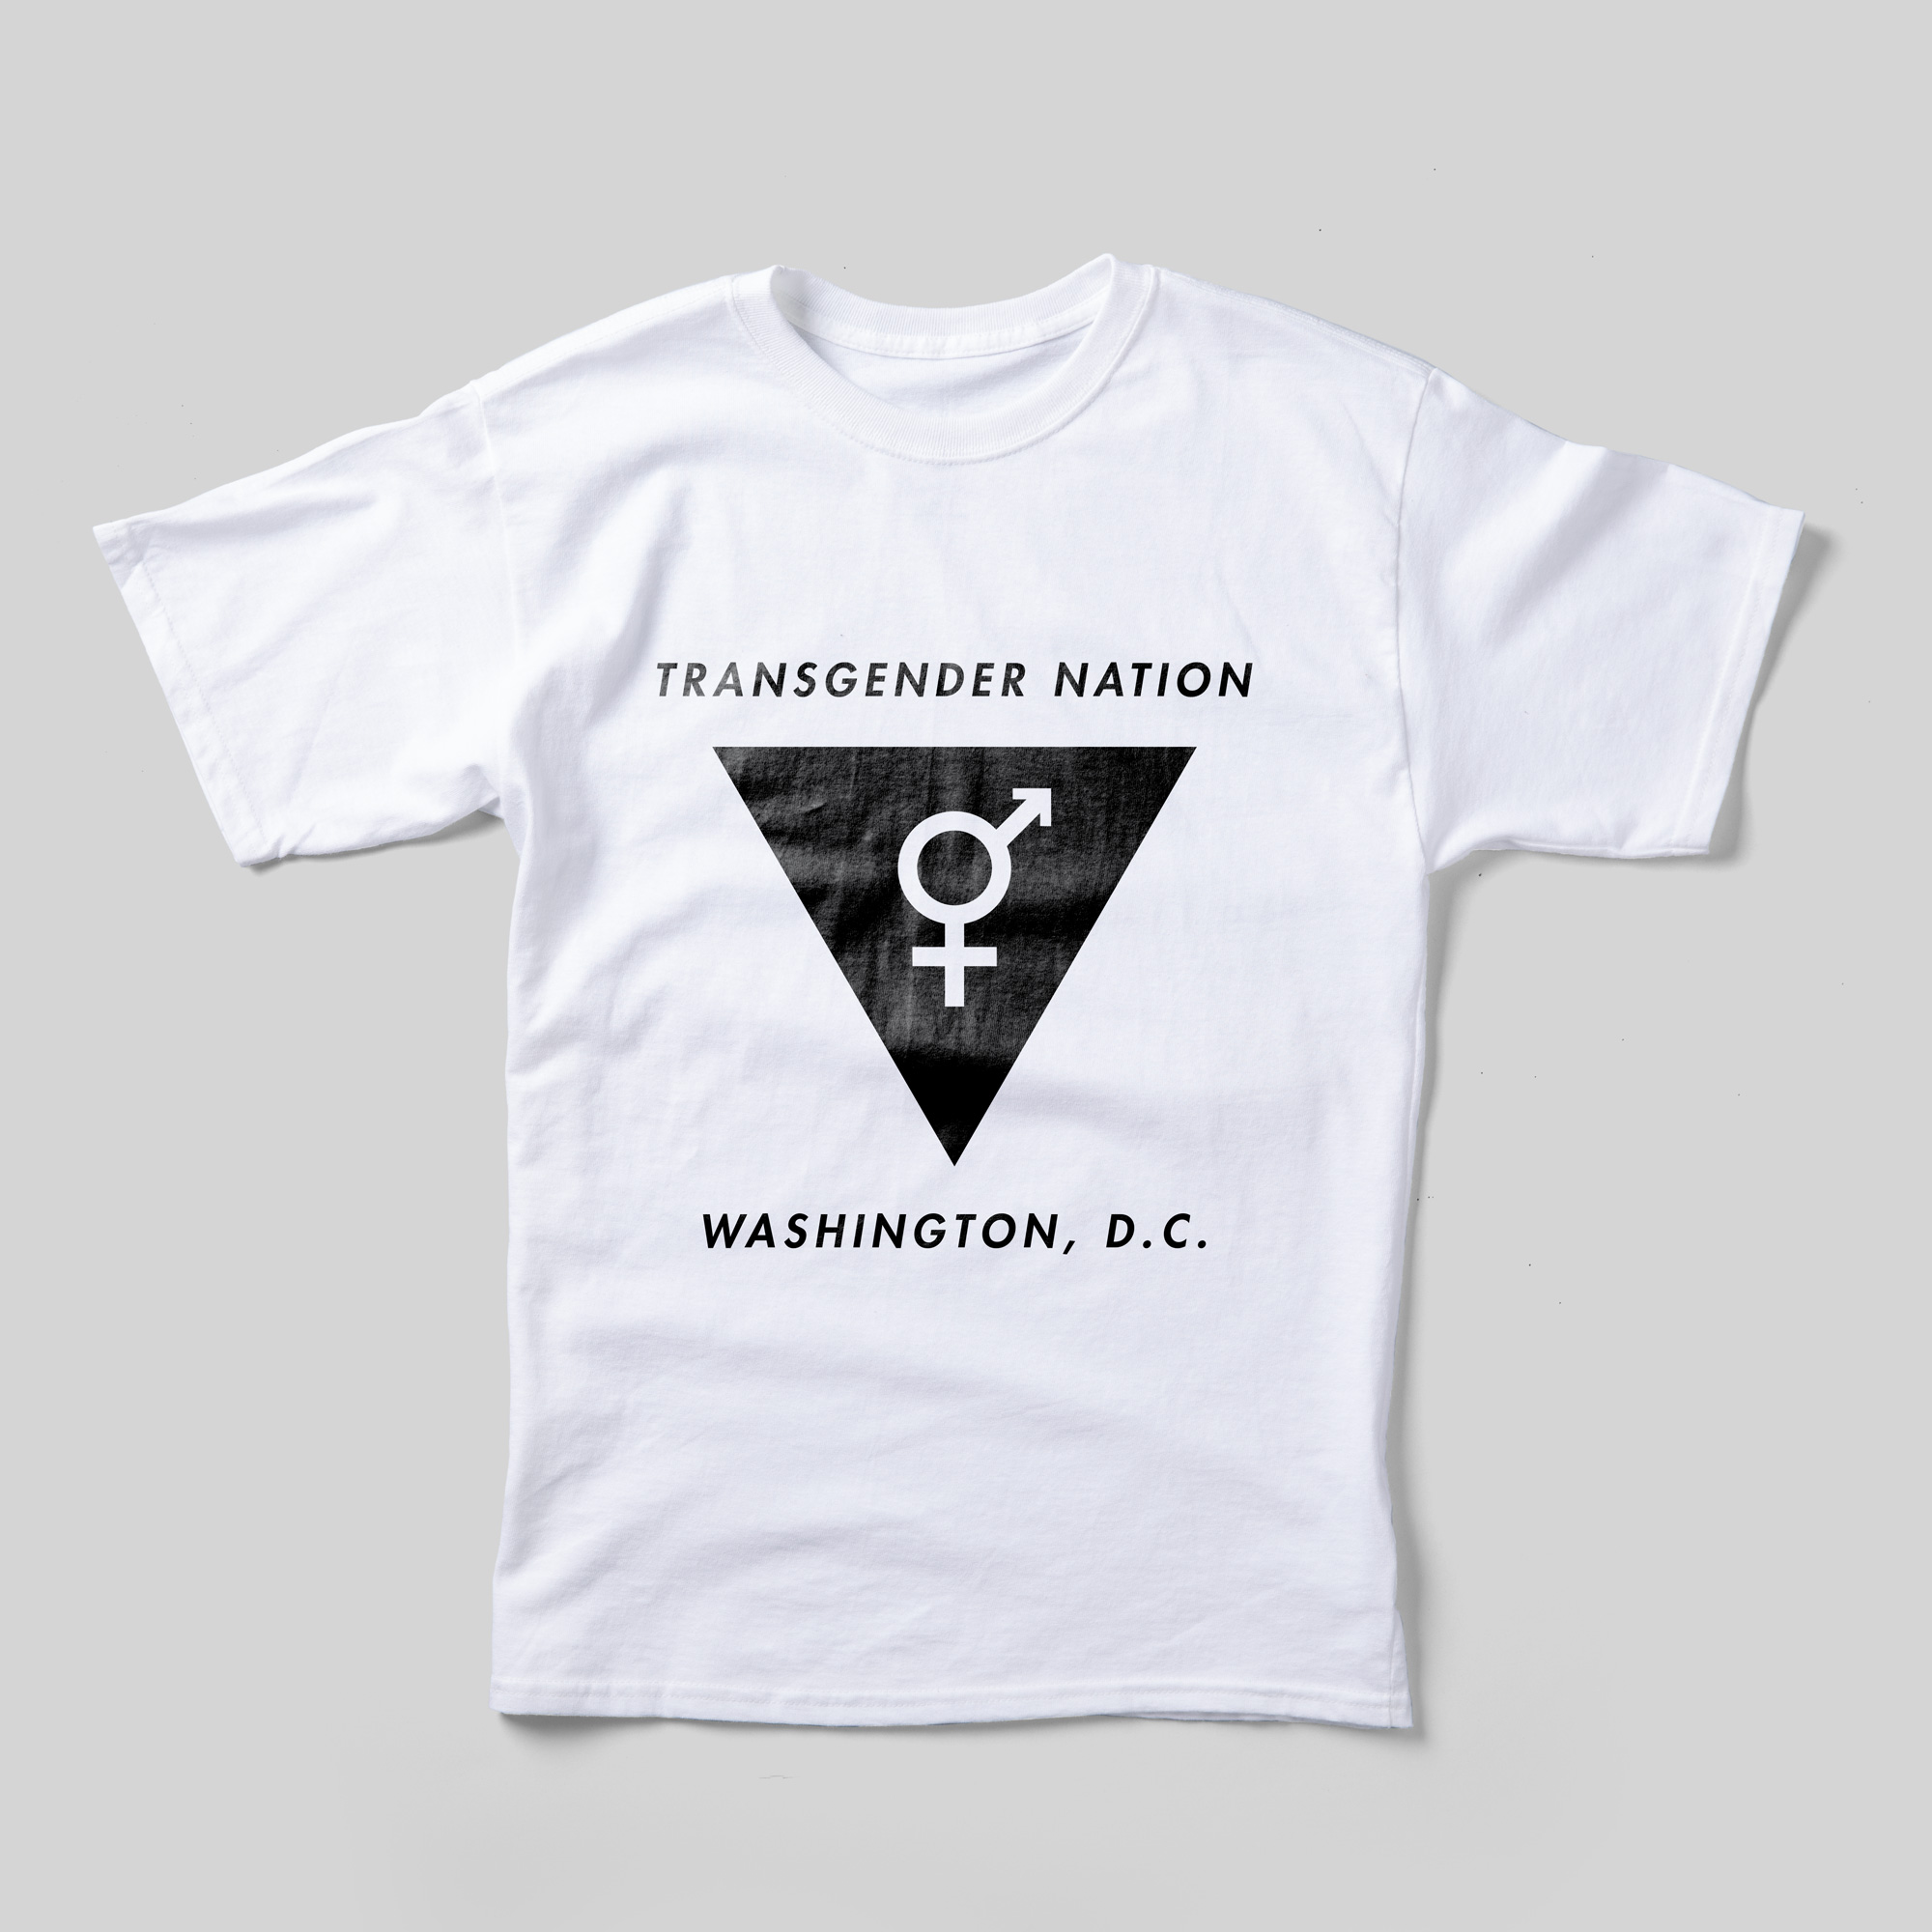 A white t-shirt that says, in black text, "Transgender Nation" at the top. Beneath it is a black upside-down triangle with the combined female-male symbol. Under the triangle is "Washington, D.C."